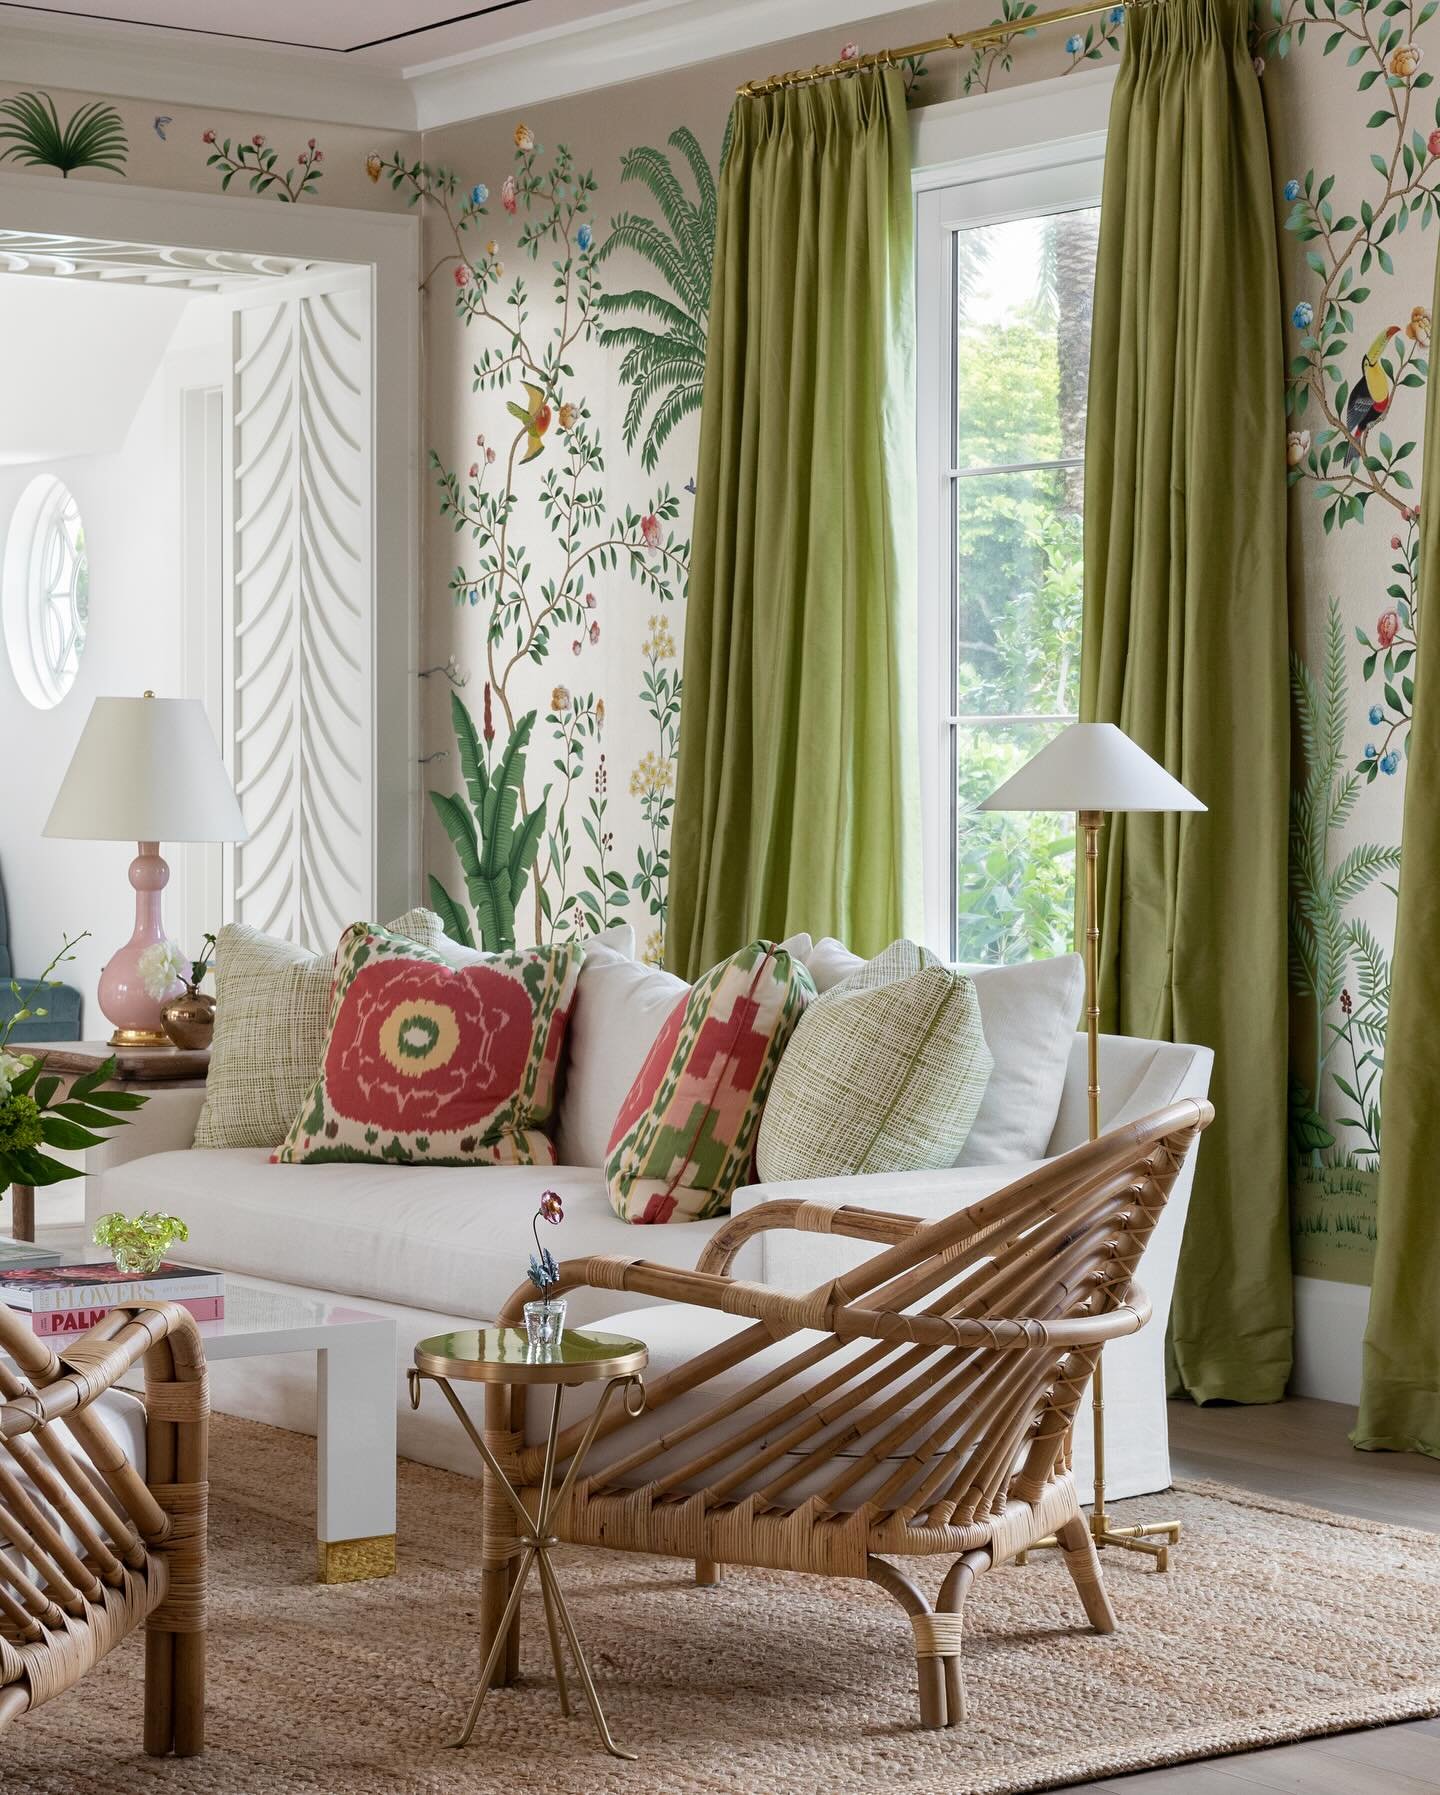 As the crown jewel of #PCFloridaFantasy, the living room sings with modern Palm Beach Regency style. Opulent wall coverings, intoxicating colors, and tropical inspired elements converge into a living space that boasts the unique charm of its locale.
